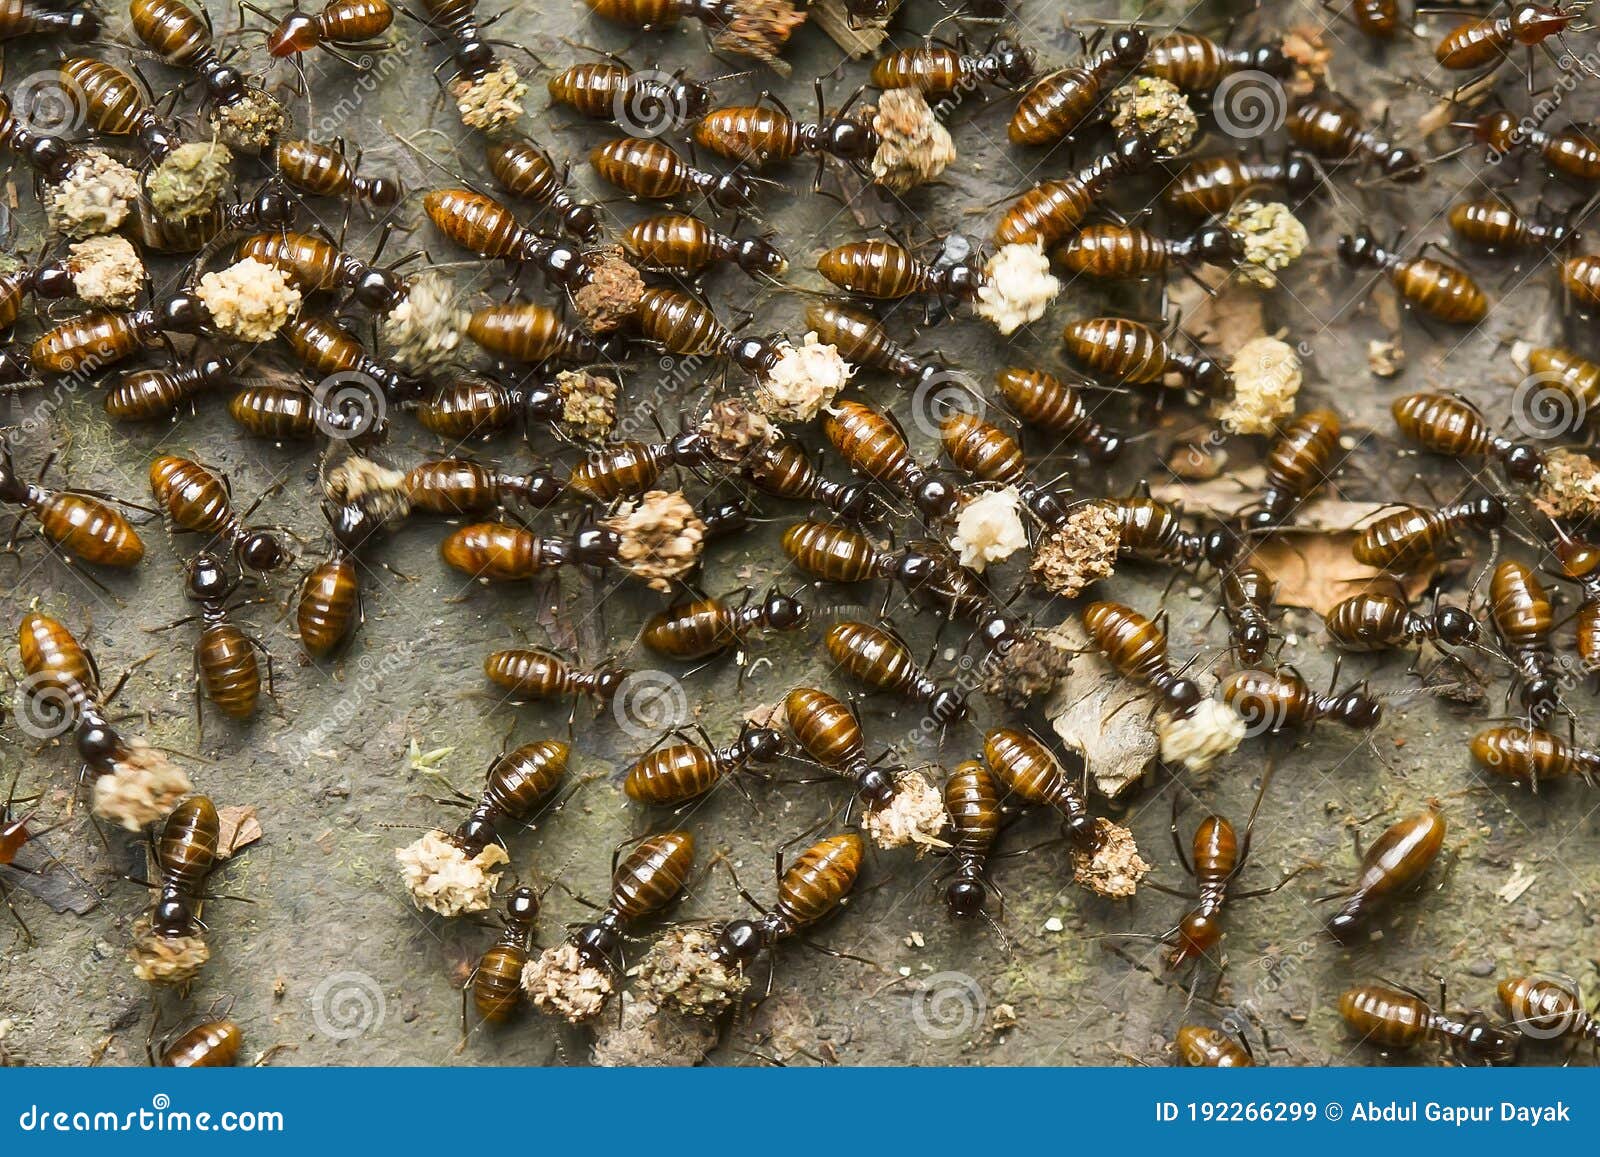 Soil Termites on Colony stock image. Image of colony - 192266299